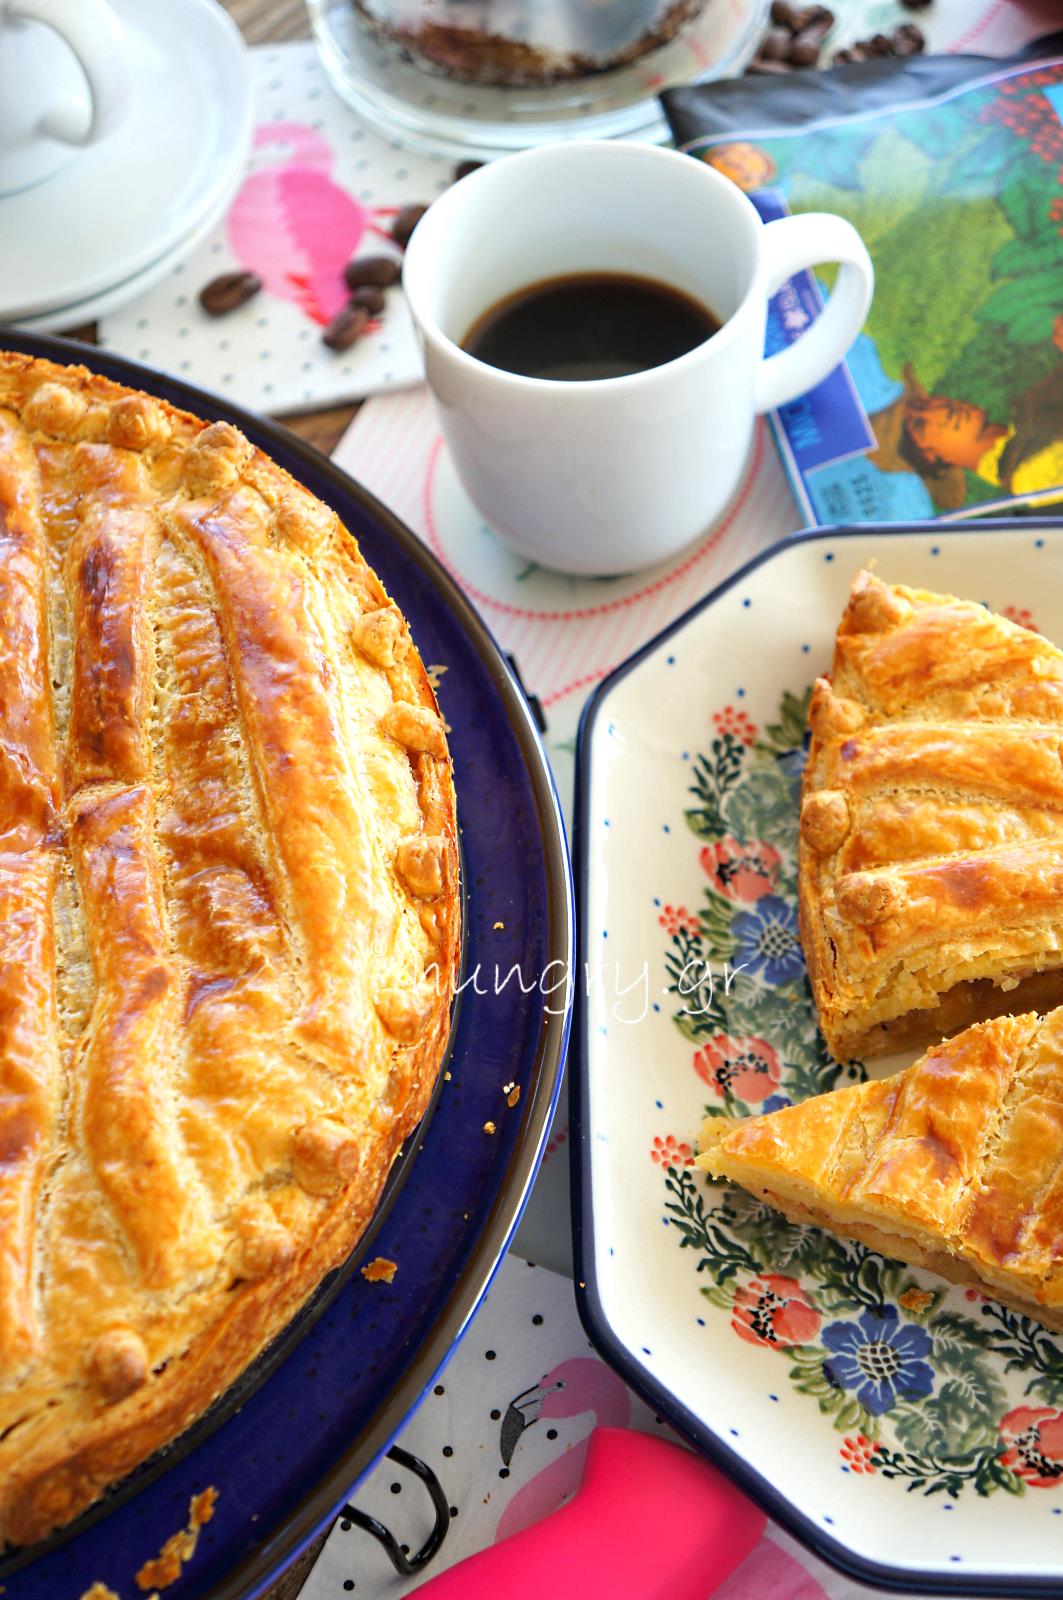 Apple Pie with Caramelized Apples